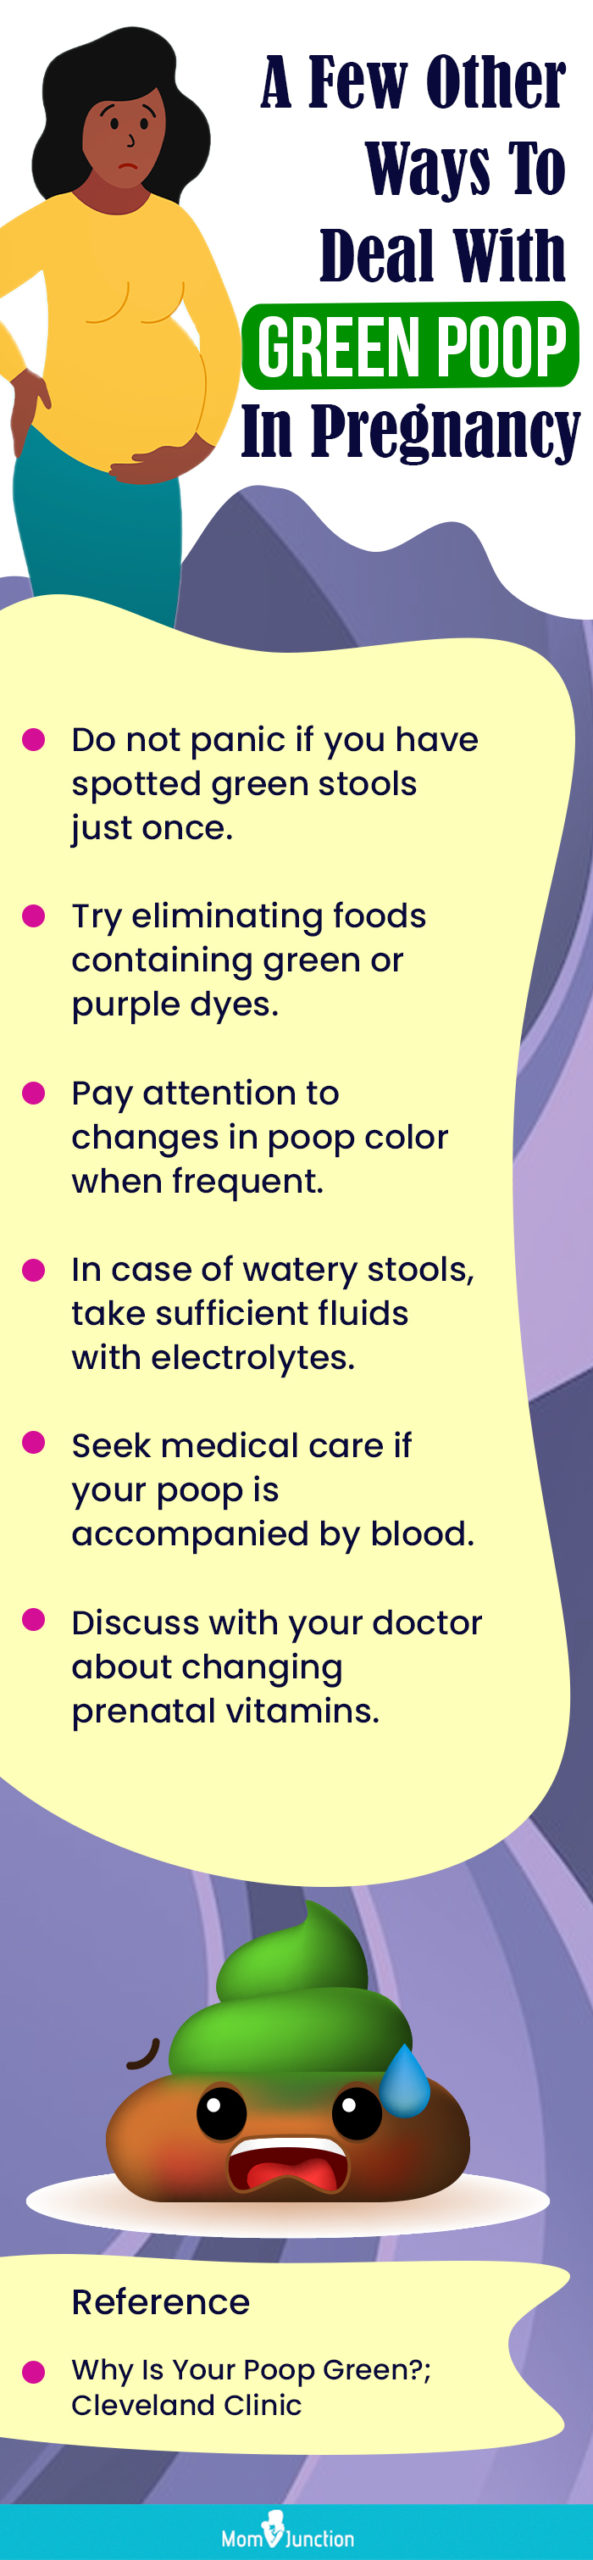 ways to deal with green poop in pregnancy (infographic)